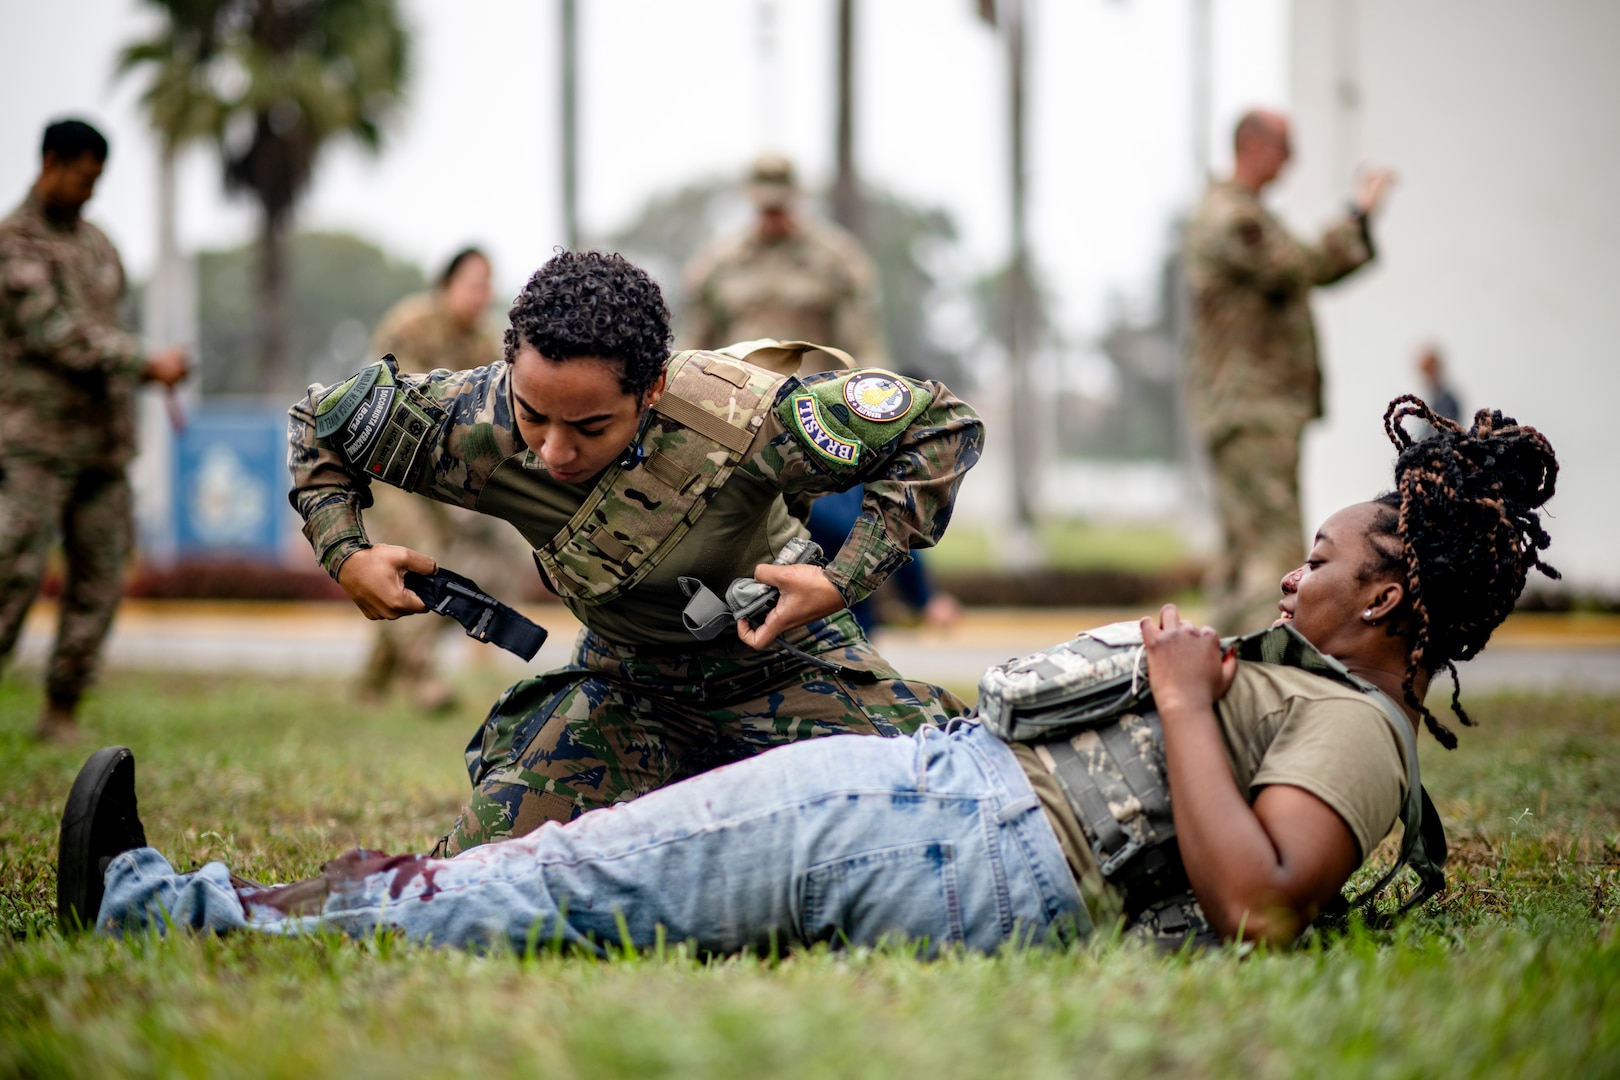 U.S. Air Force Airmen assigned to the 167th Aeromedical Evacuation Squadron demonstrate a litter carry for a Tactical Combat Casualty Care course with Peruvian and Brazilian armed forces as part of exercise Resolute Sentinel 2024 at Las Palmas Air Base in Lima, Peru, June 4, 2024.